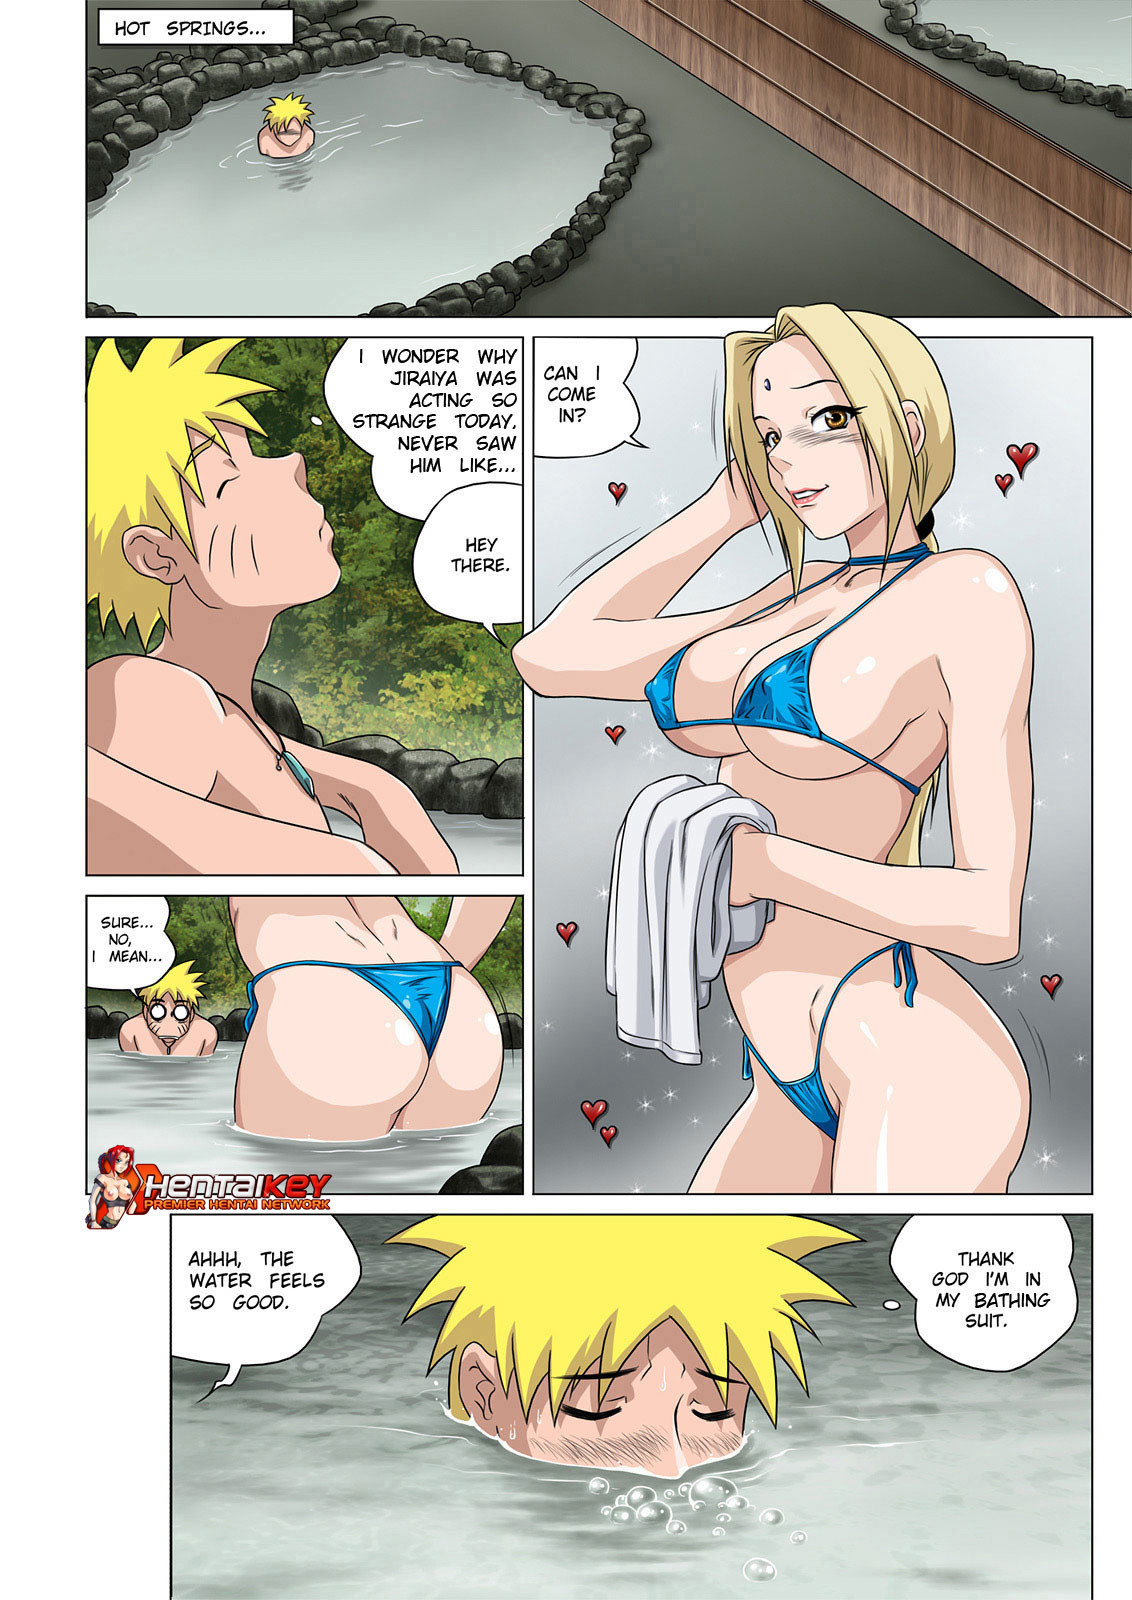 Read Naruto Comic There Is Something About Tsunade Hentai Porns Manga And Porncomics Xxx